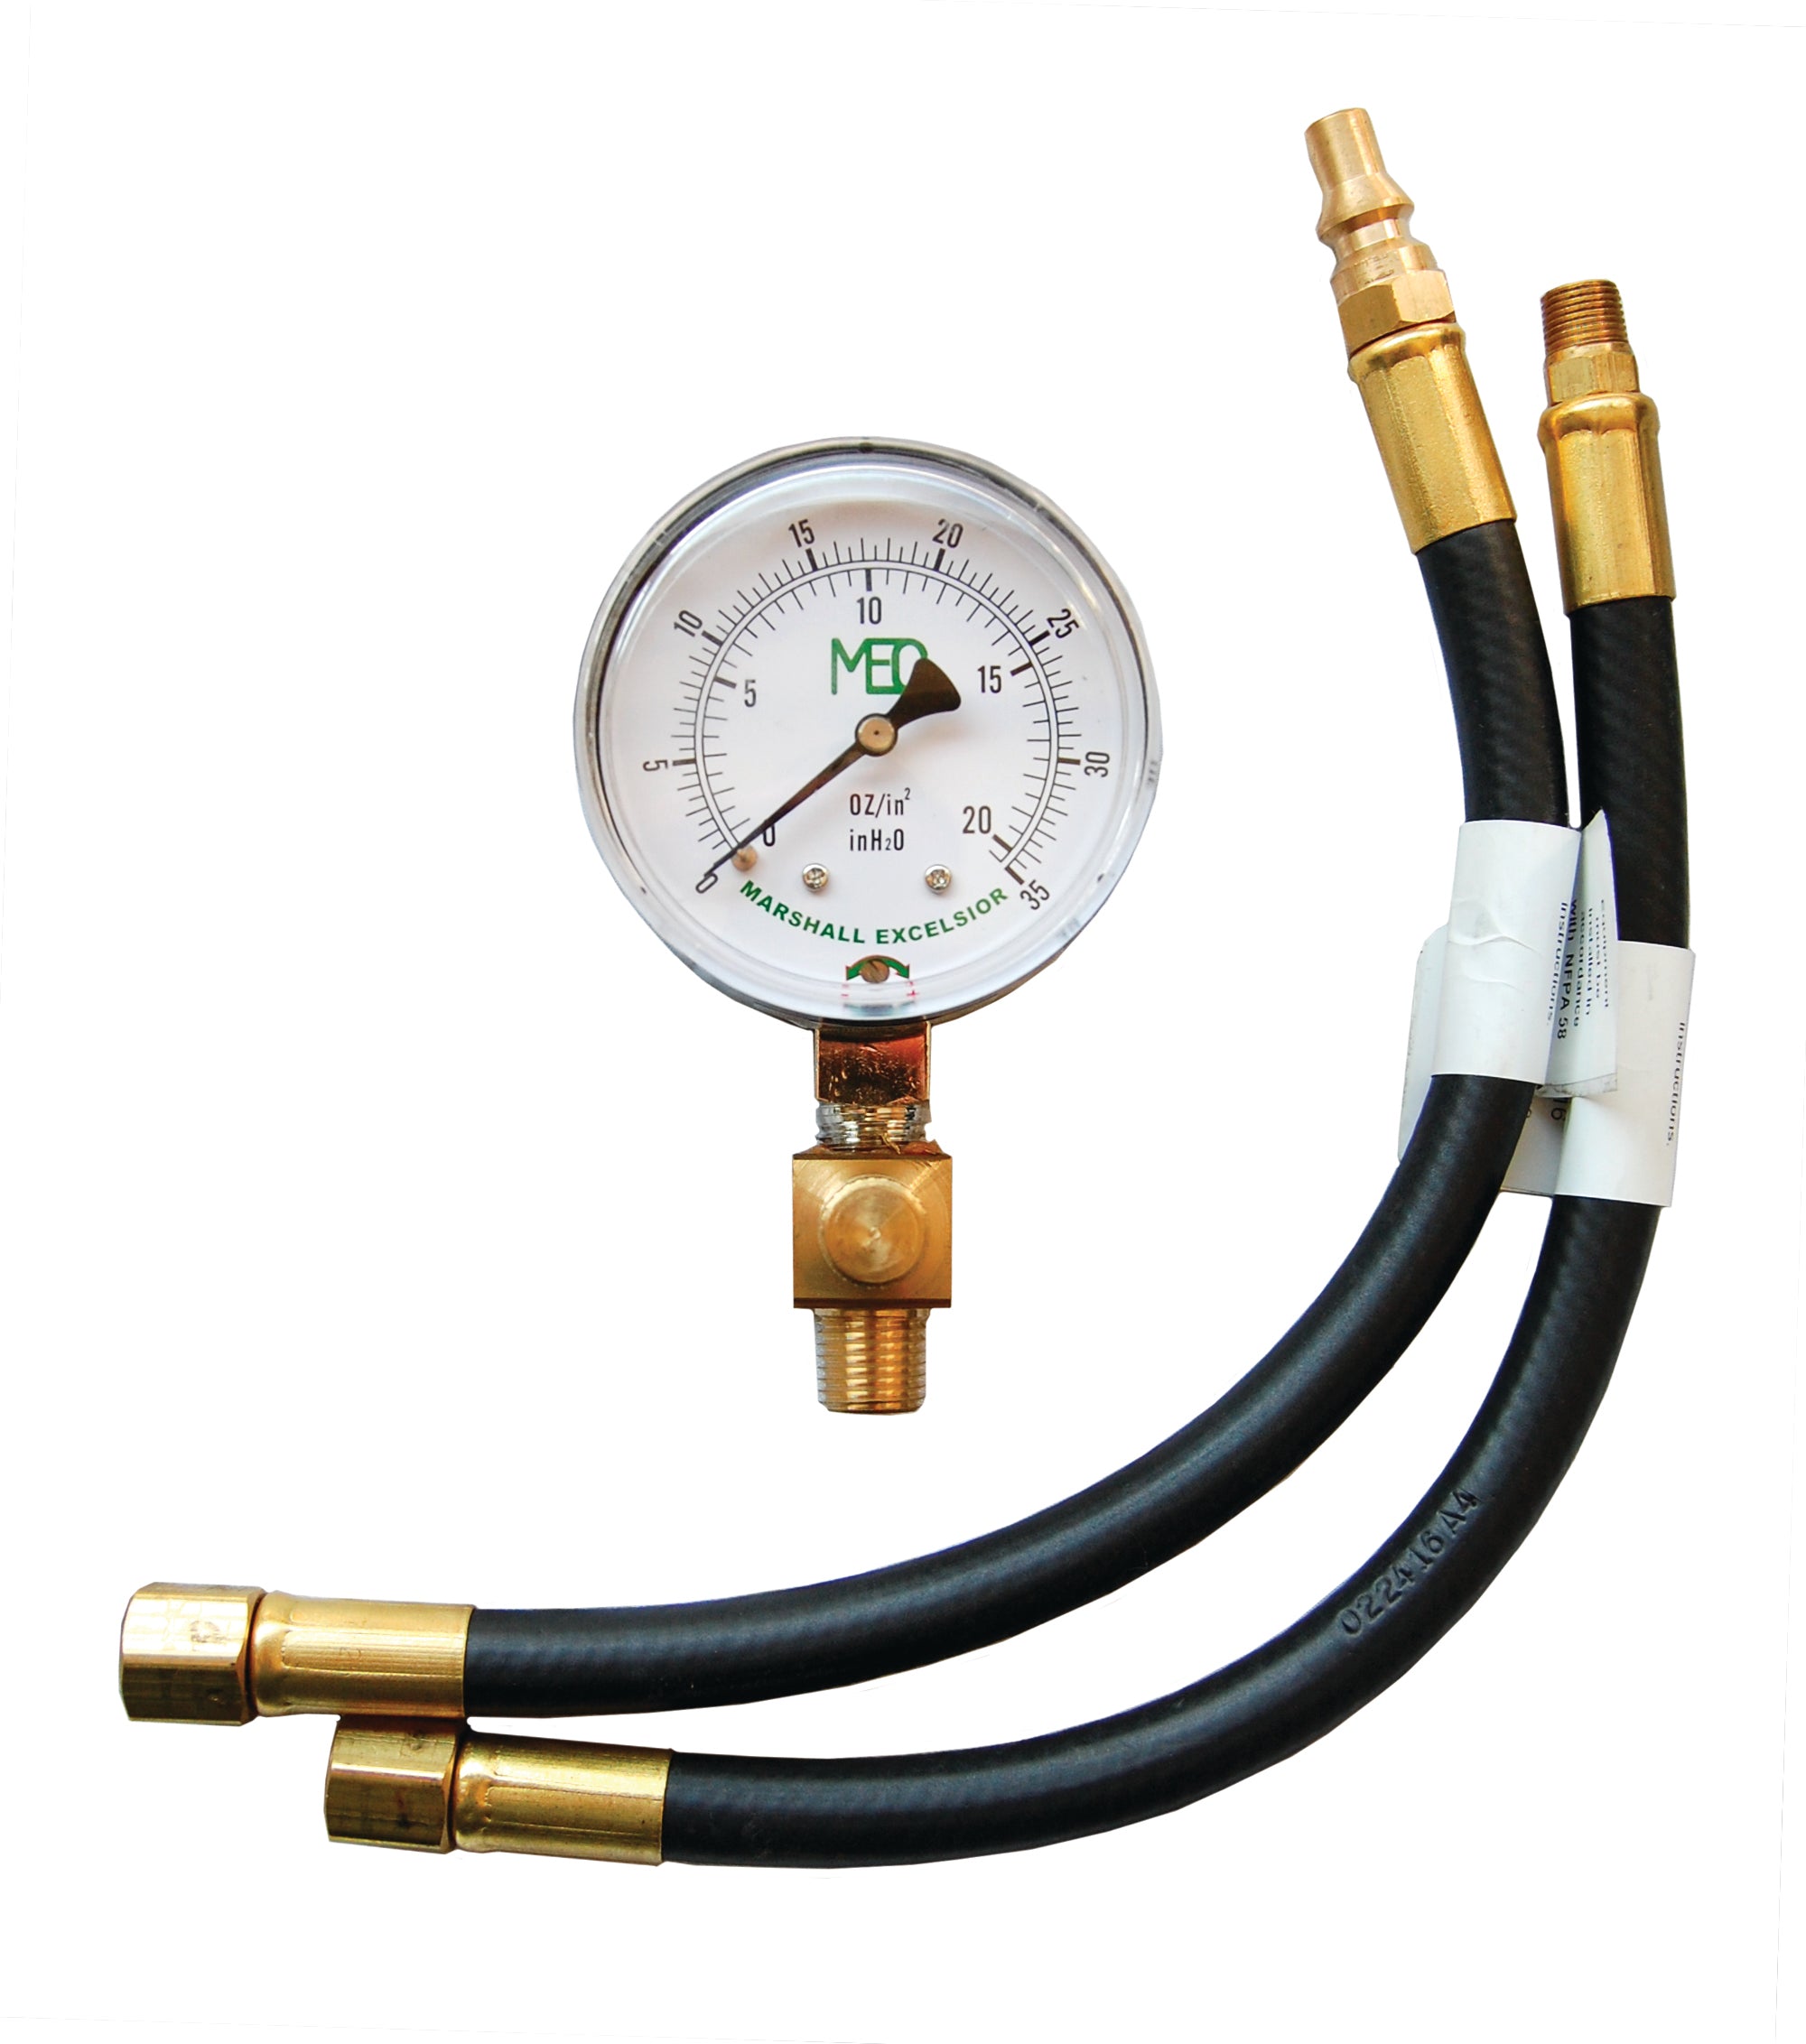 Marshall Excelsior MER432SP-12 Replacement Parts for Low Pressure LP Test Kit - 12" Quick Connect Hose